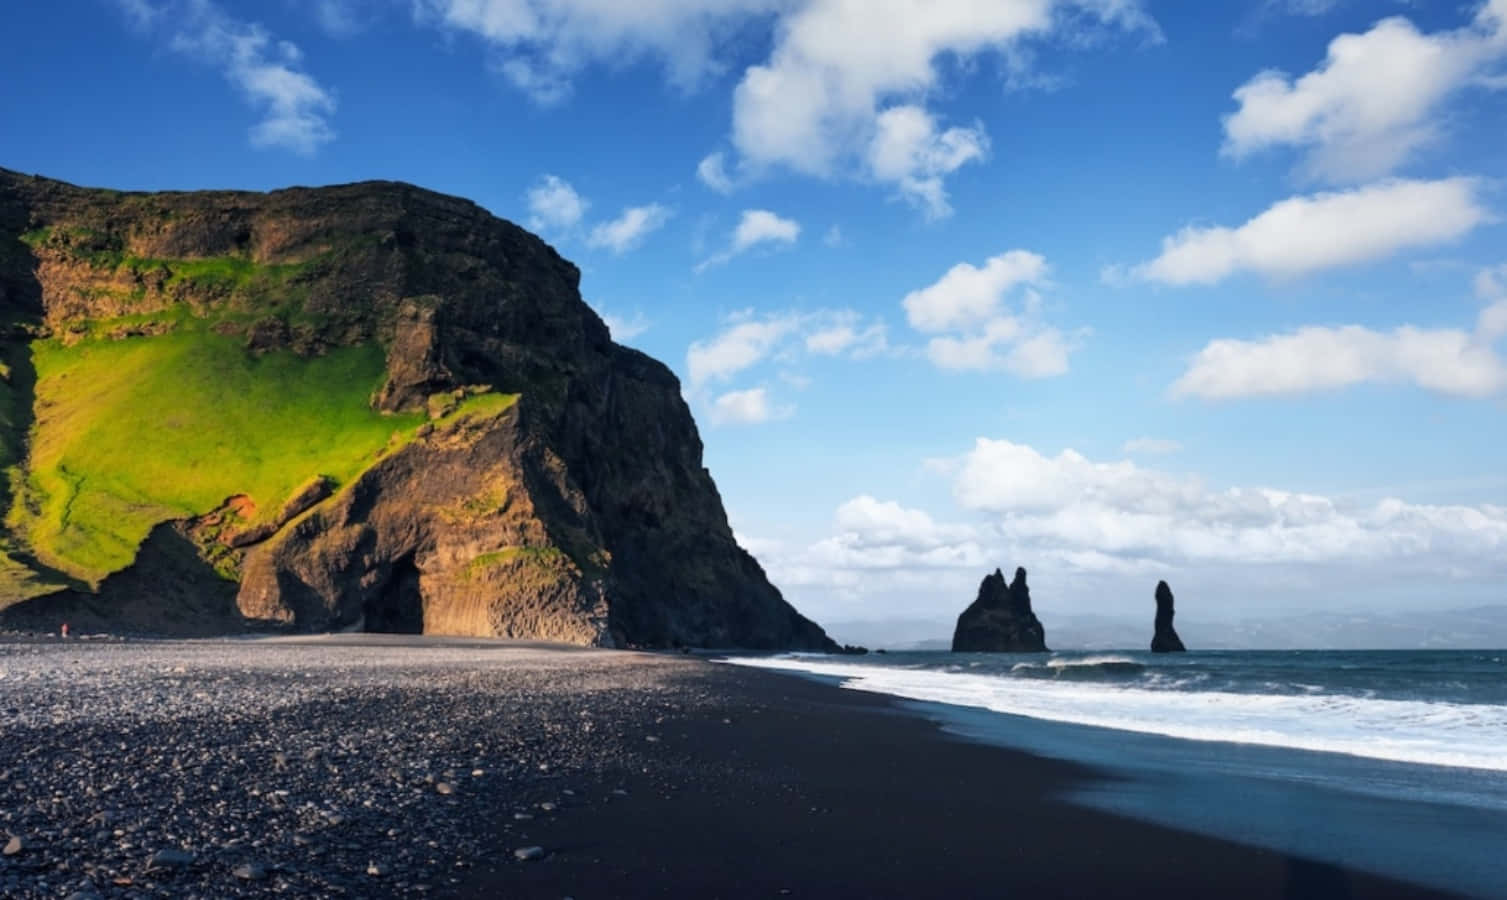 Enjoy the crystal clear views of the picturesque Black Sand Beach. Wallpaper